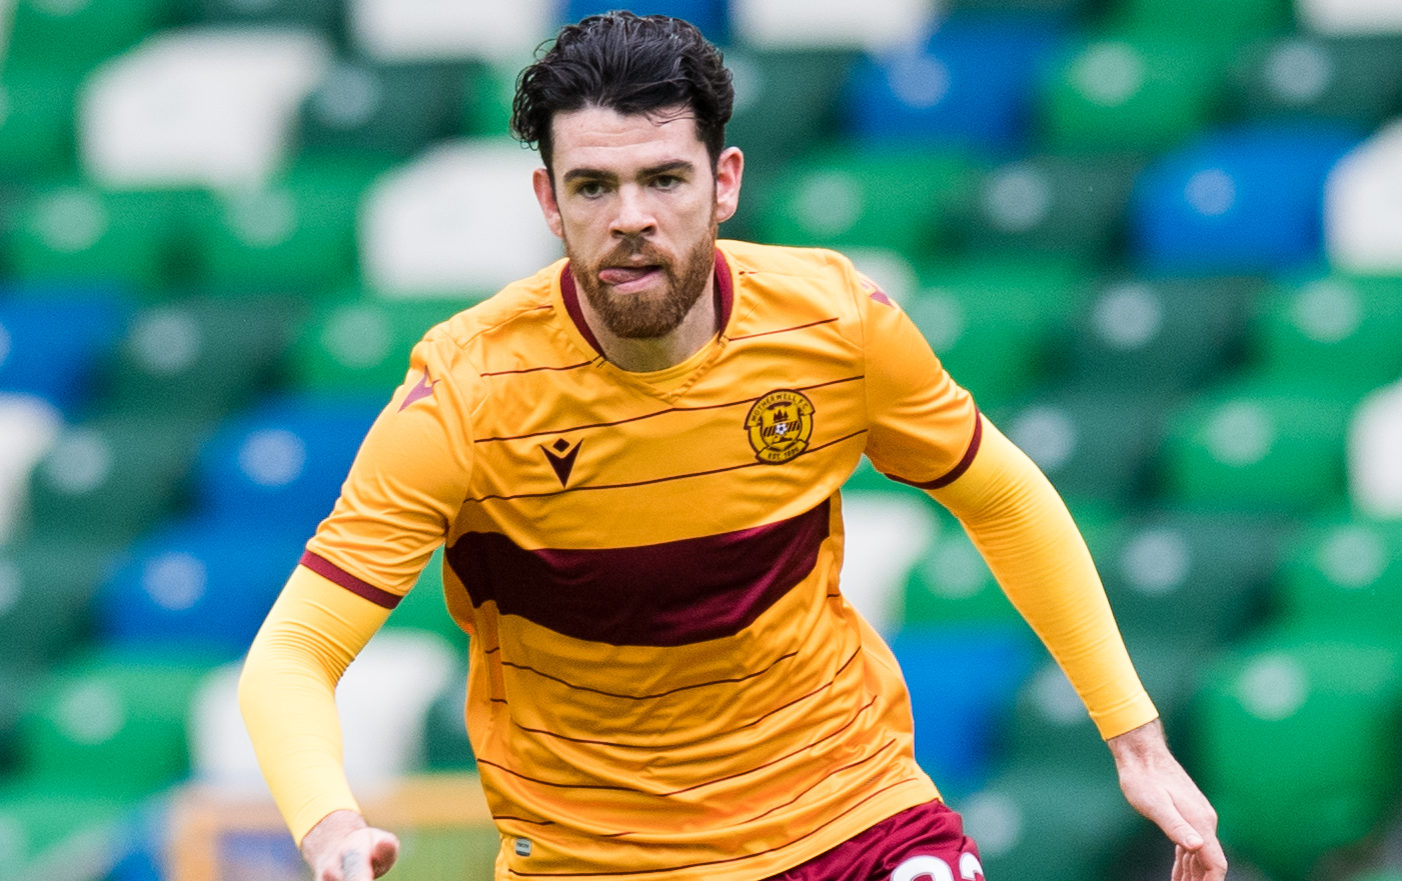 Liam Donnelly is a vital cog for Motherwell